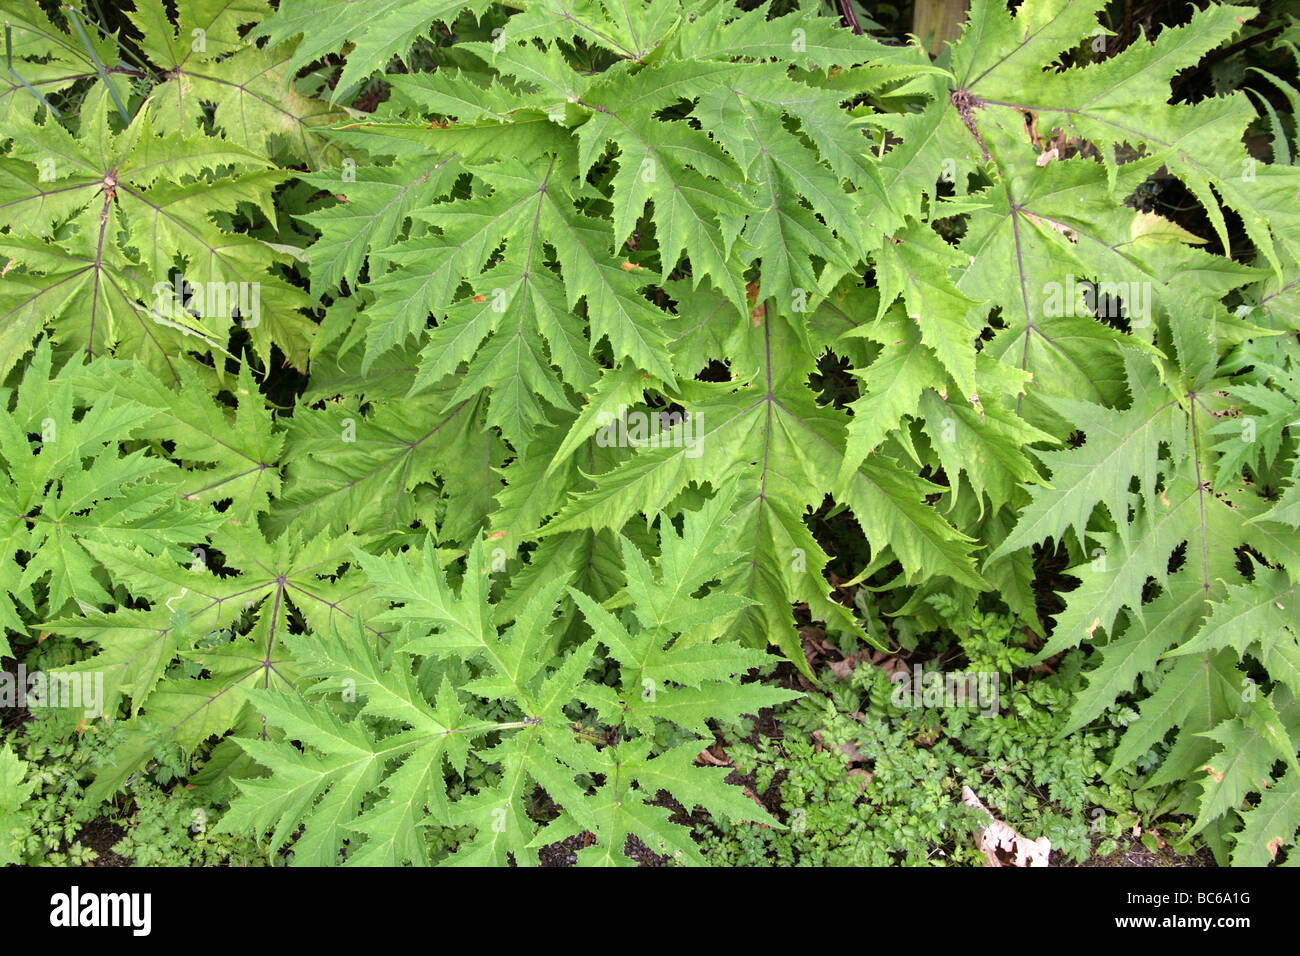 Leaves of the Giant Hogweed or Giant Cow-parsley, Heracleum mantegazzianum, Apiaceae Stock Photo